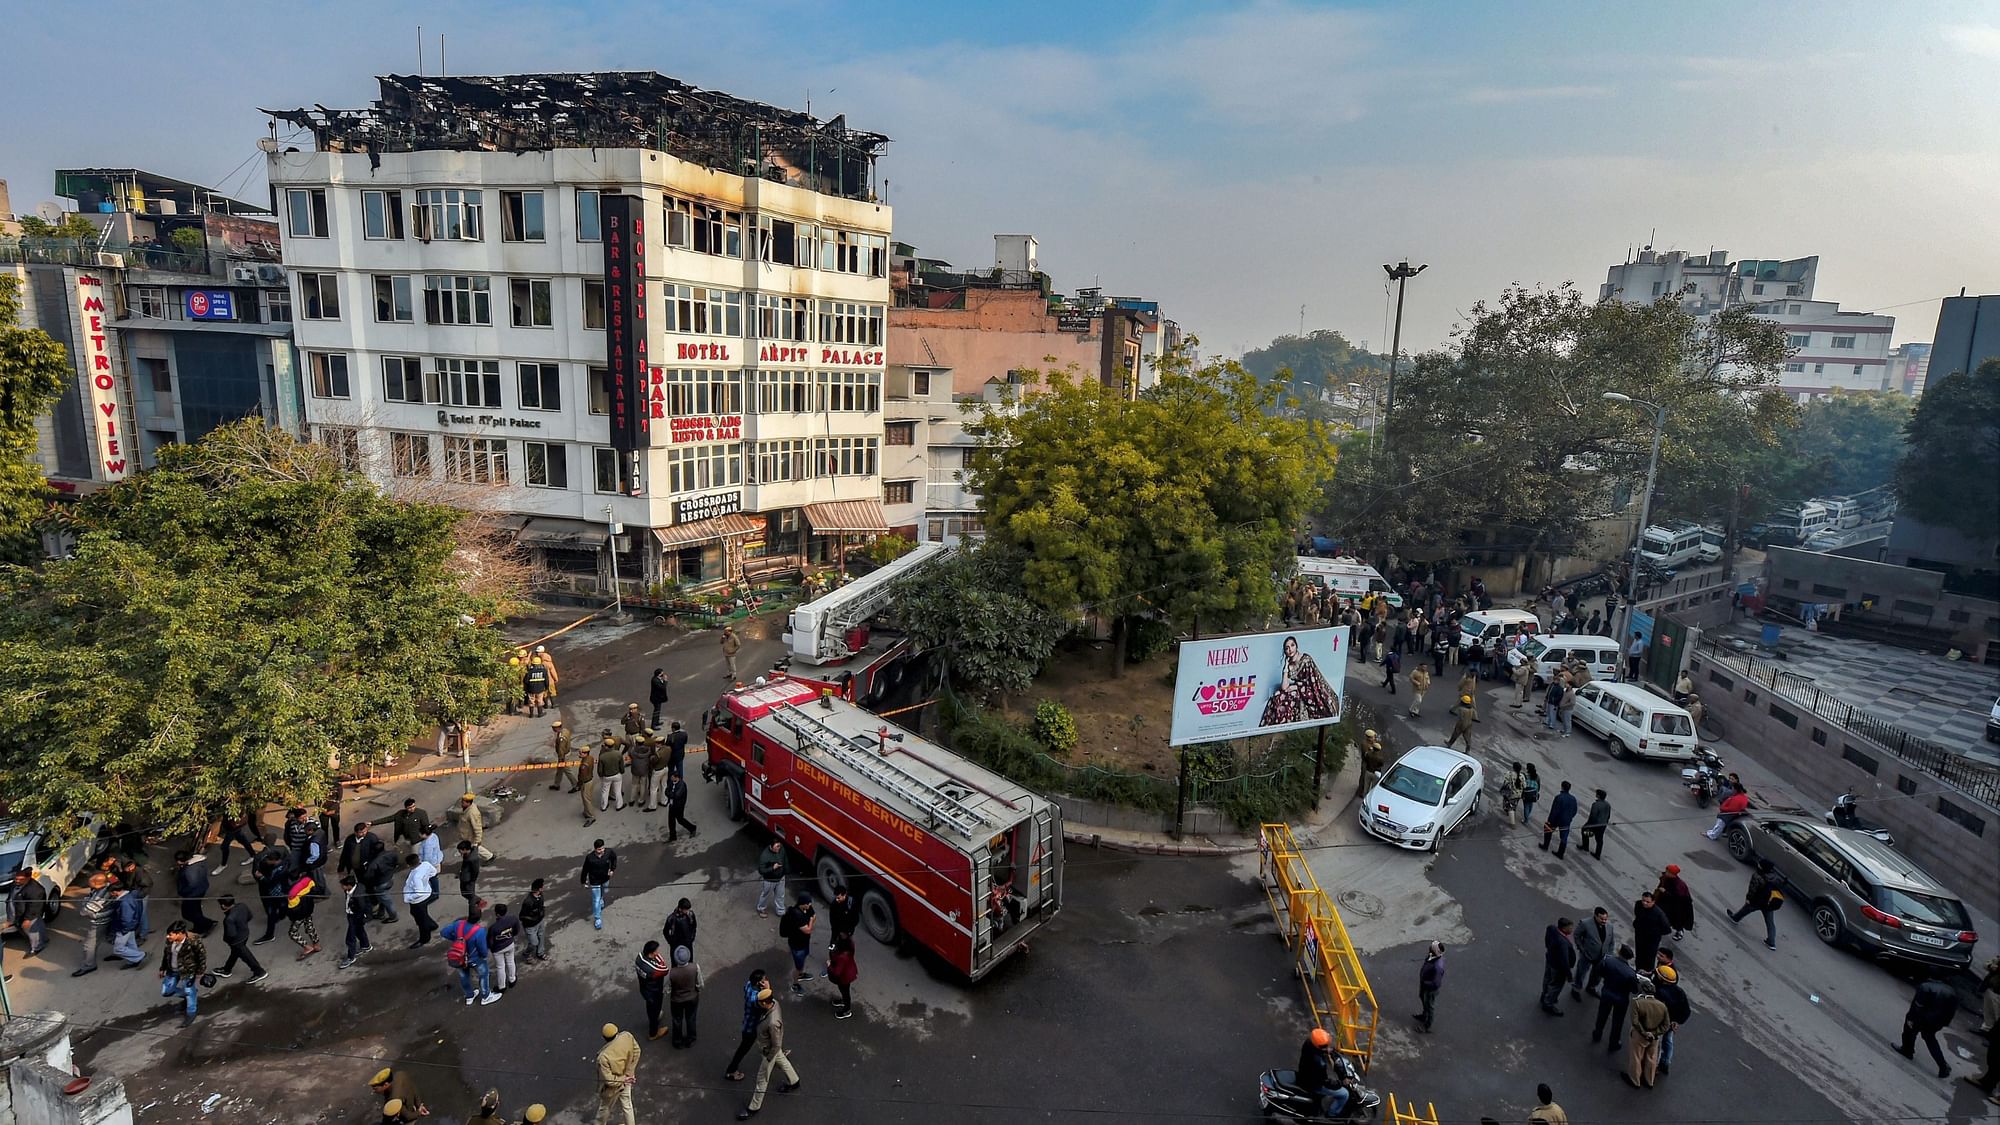 The fire that broke out at a hotel in Delhi’s Karol Bagh on Tuesday morning has claimed at least 17 lives.&nbsp;